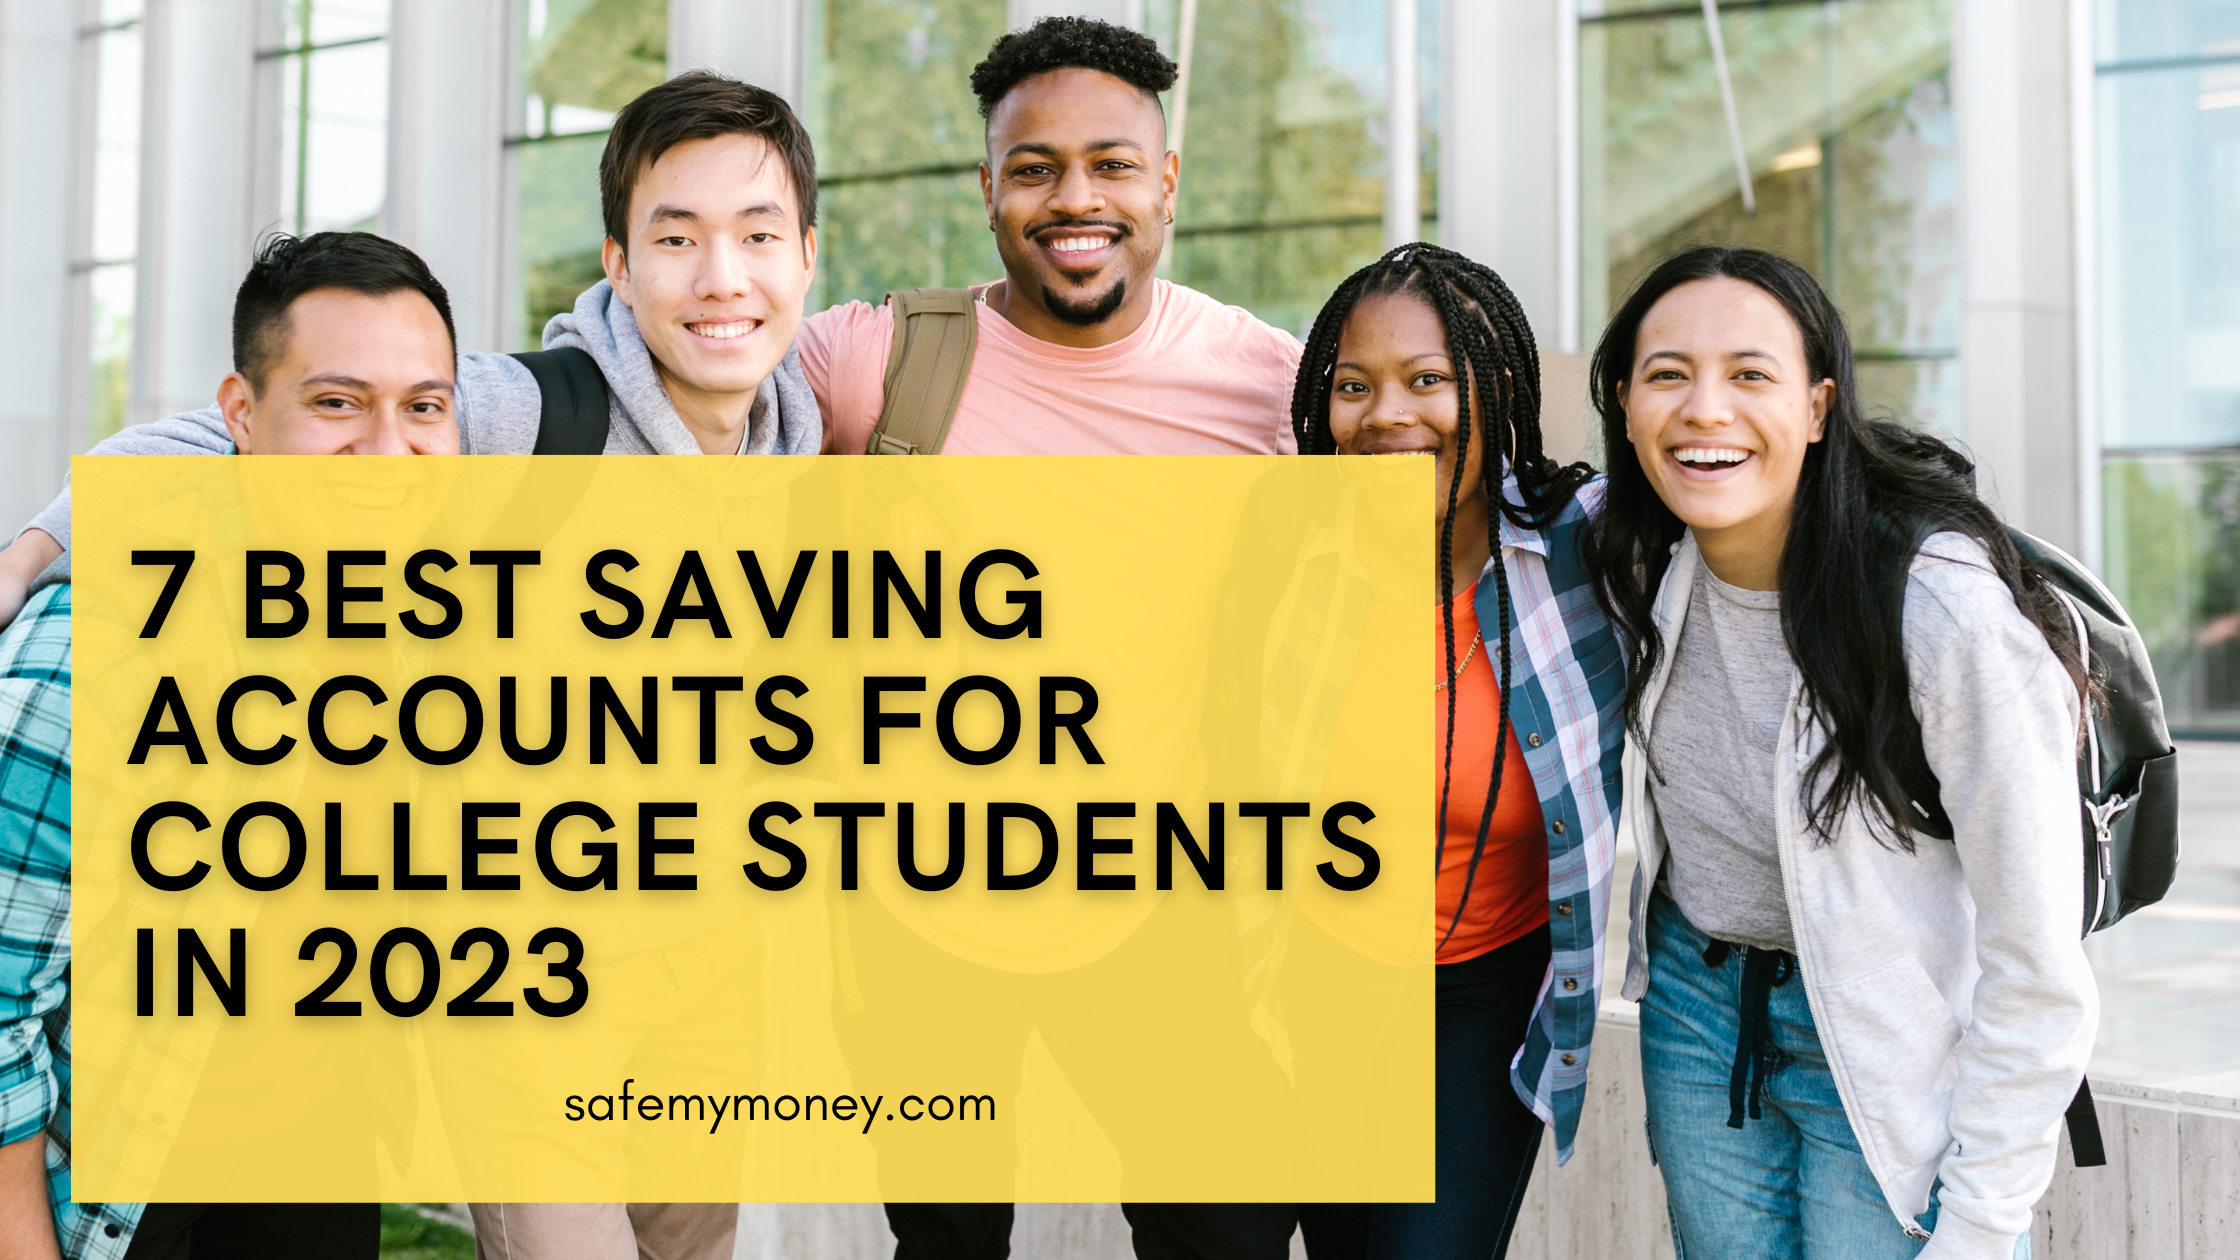 7 Best Saving Accounts For College Students In 2023